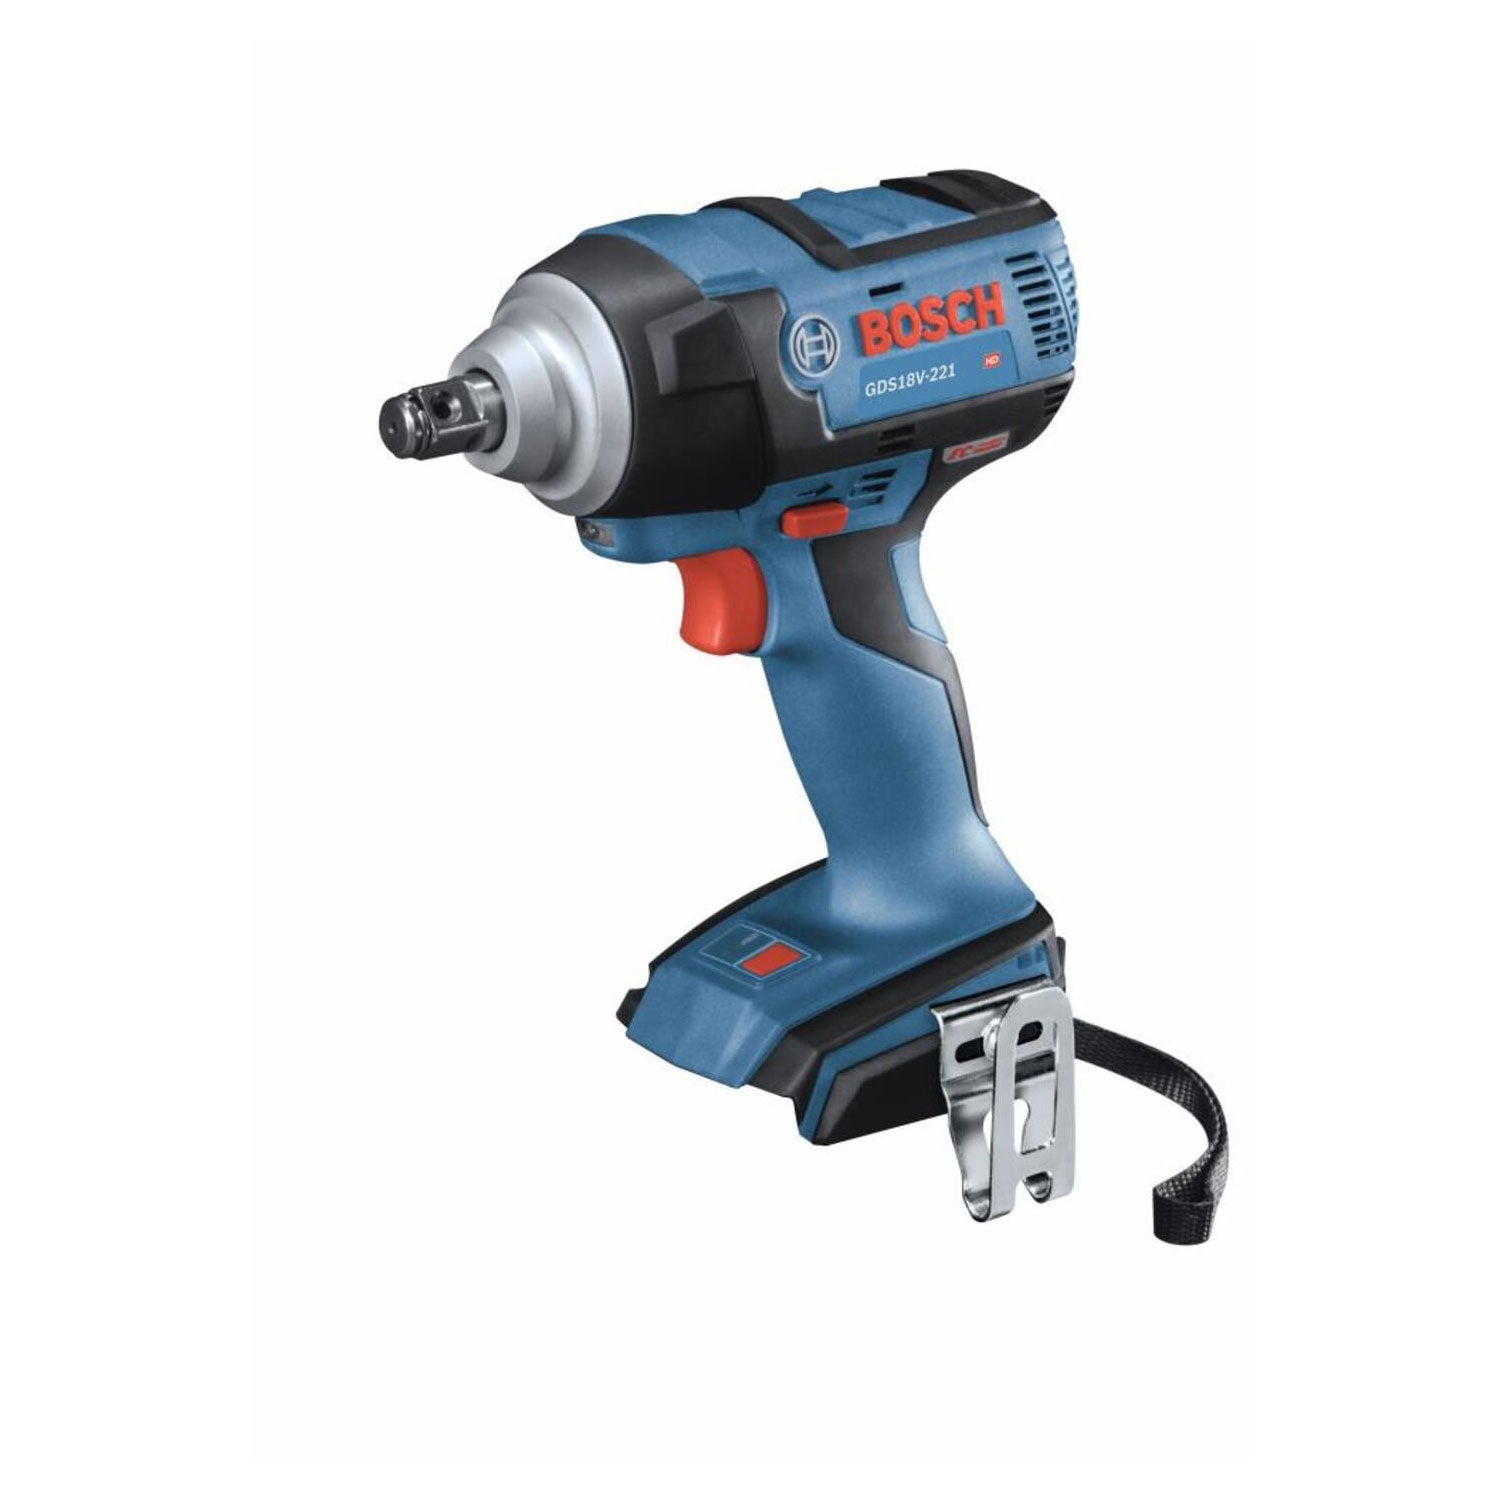 Bosch GDS18V-221N 18V EC Lithium-IOn Brushless Cordless 1/2" Impact Wrench with Friction Ring and Thru-Hole (Bare Tool)